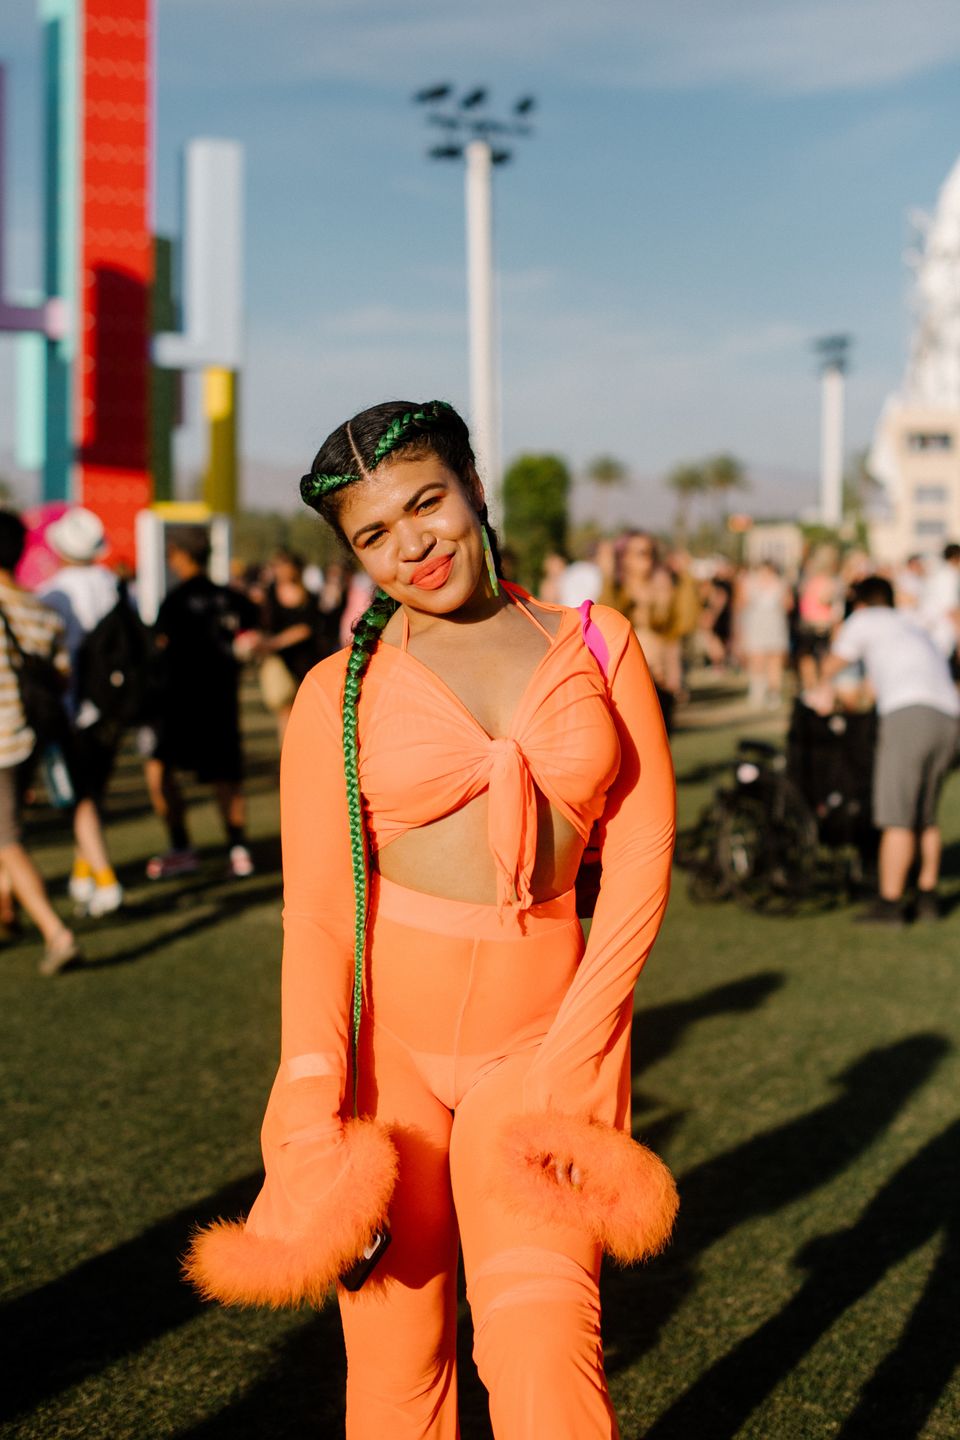 Rosalía outfit at Coachella 2019  Tracksuit women, Girly fashion